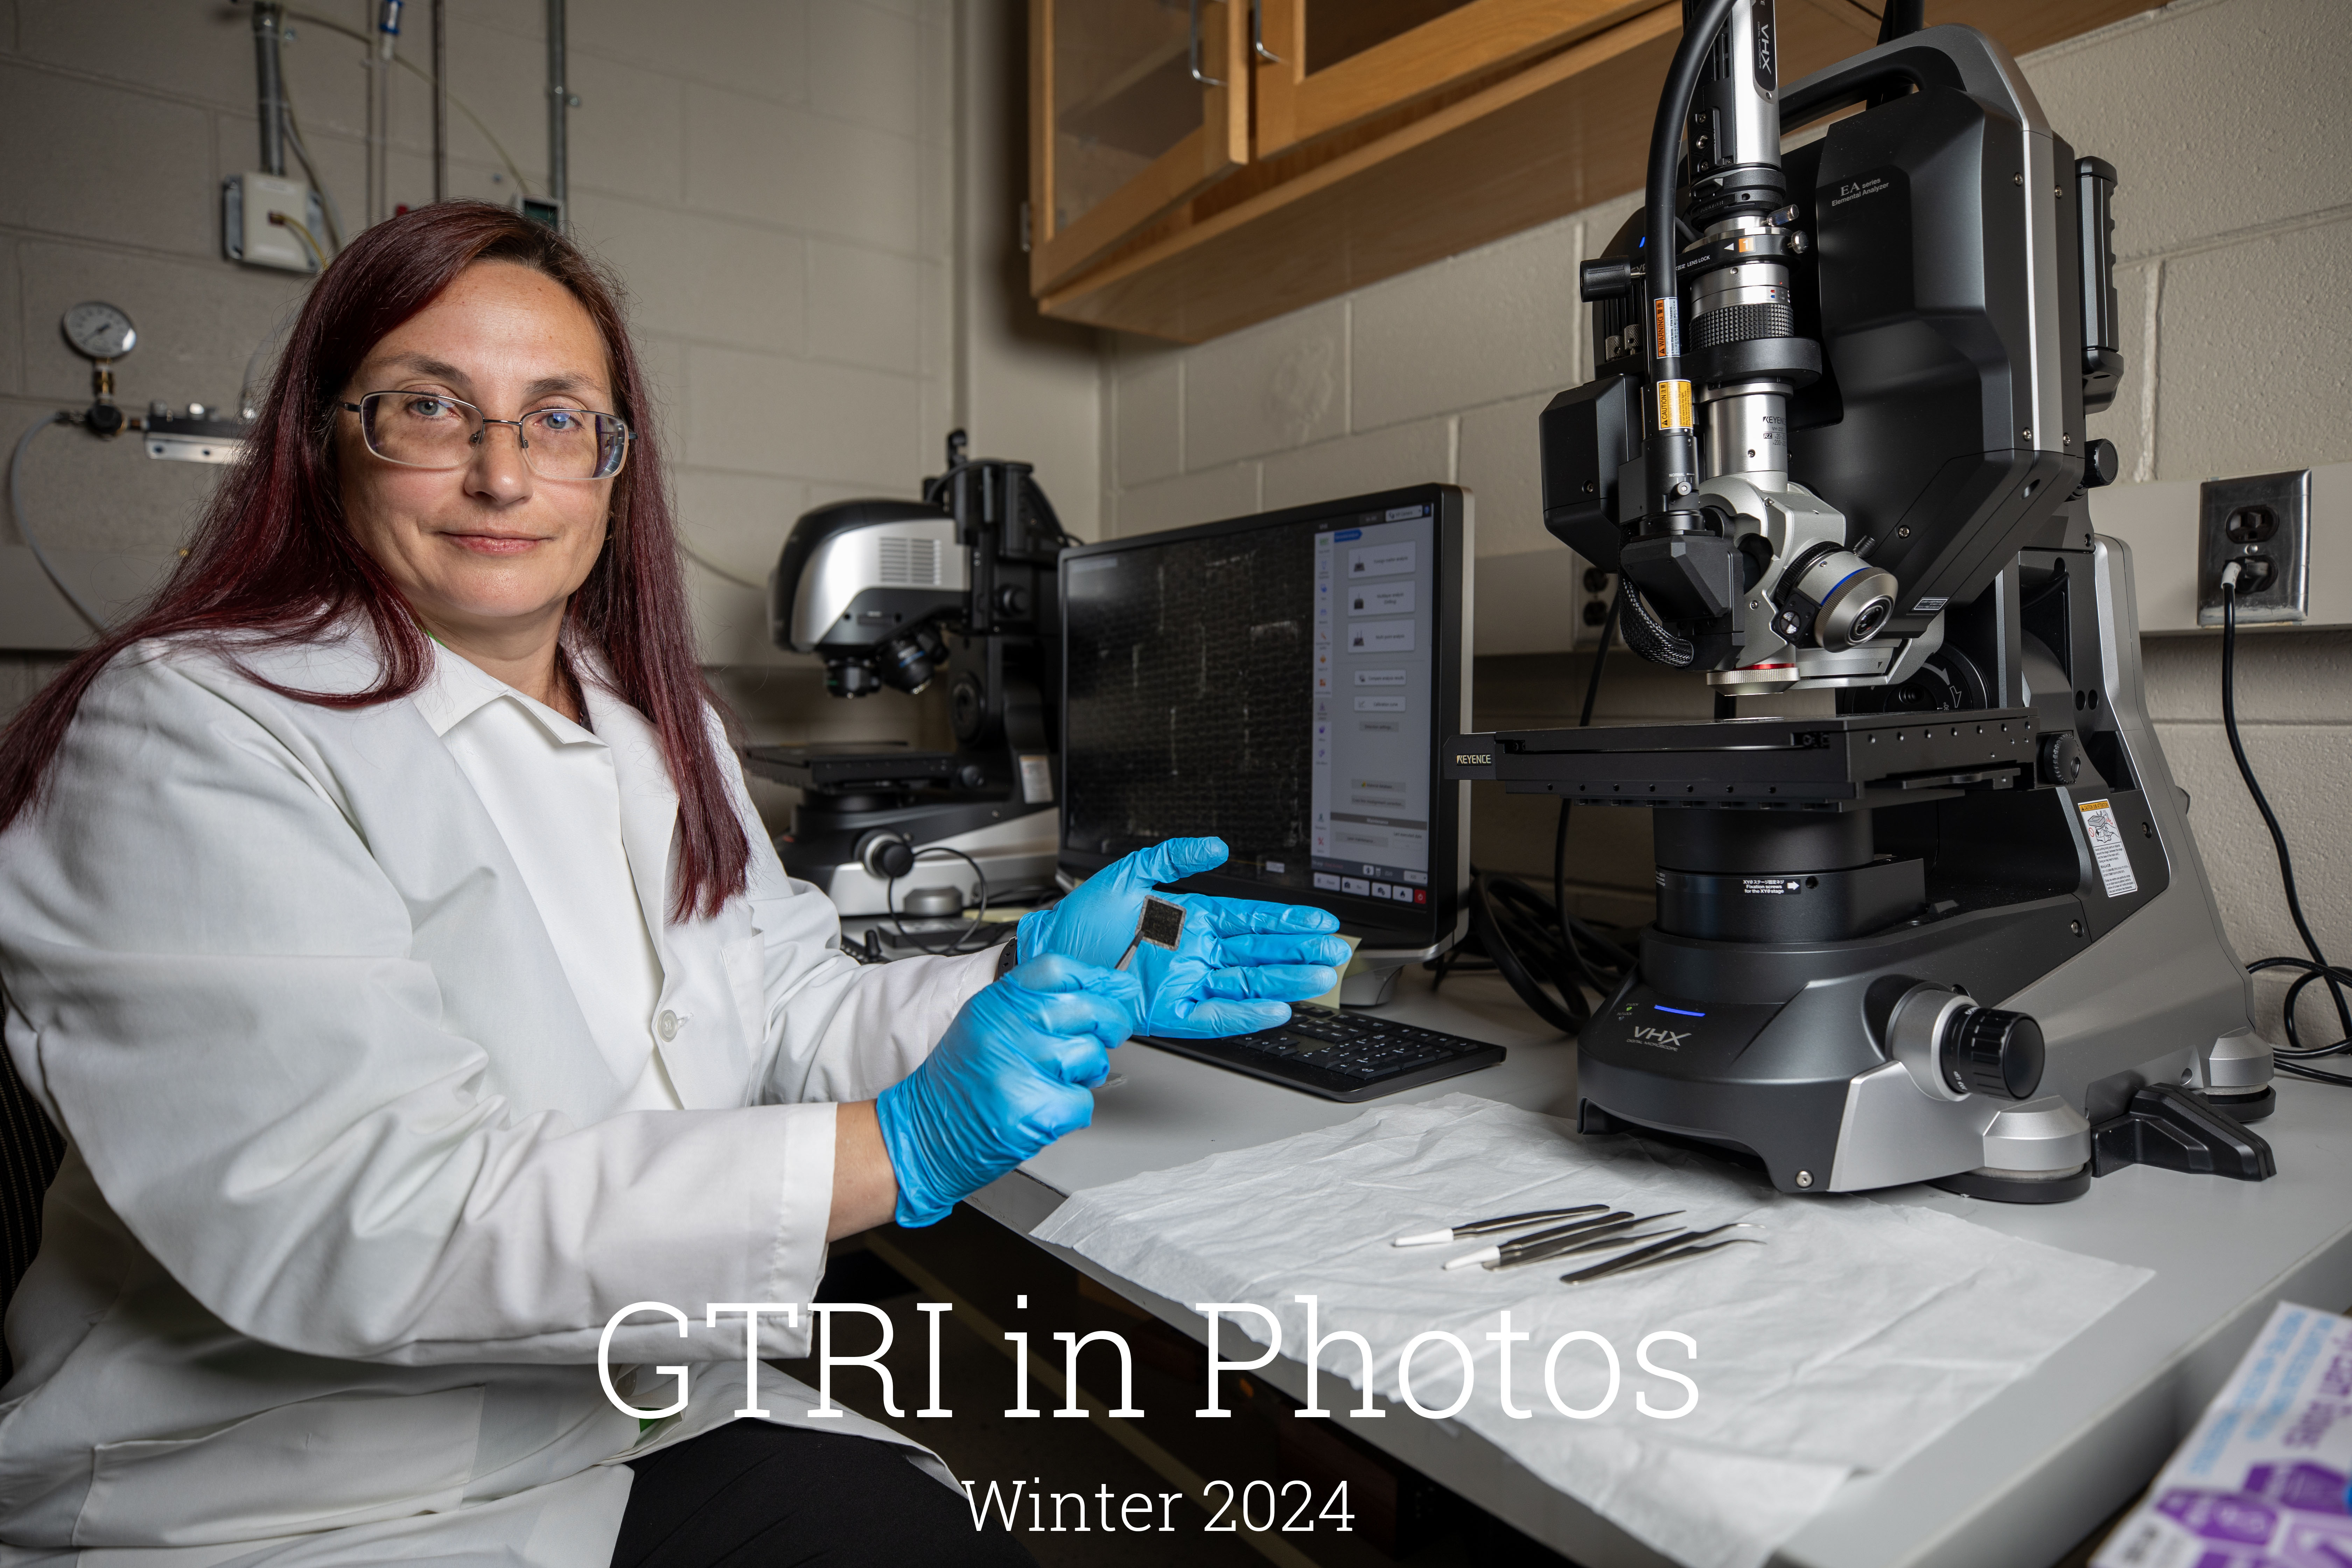 GTRI researchers shows materials sample